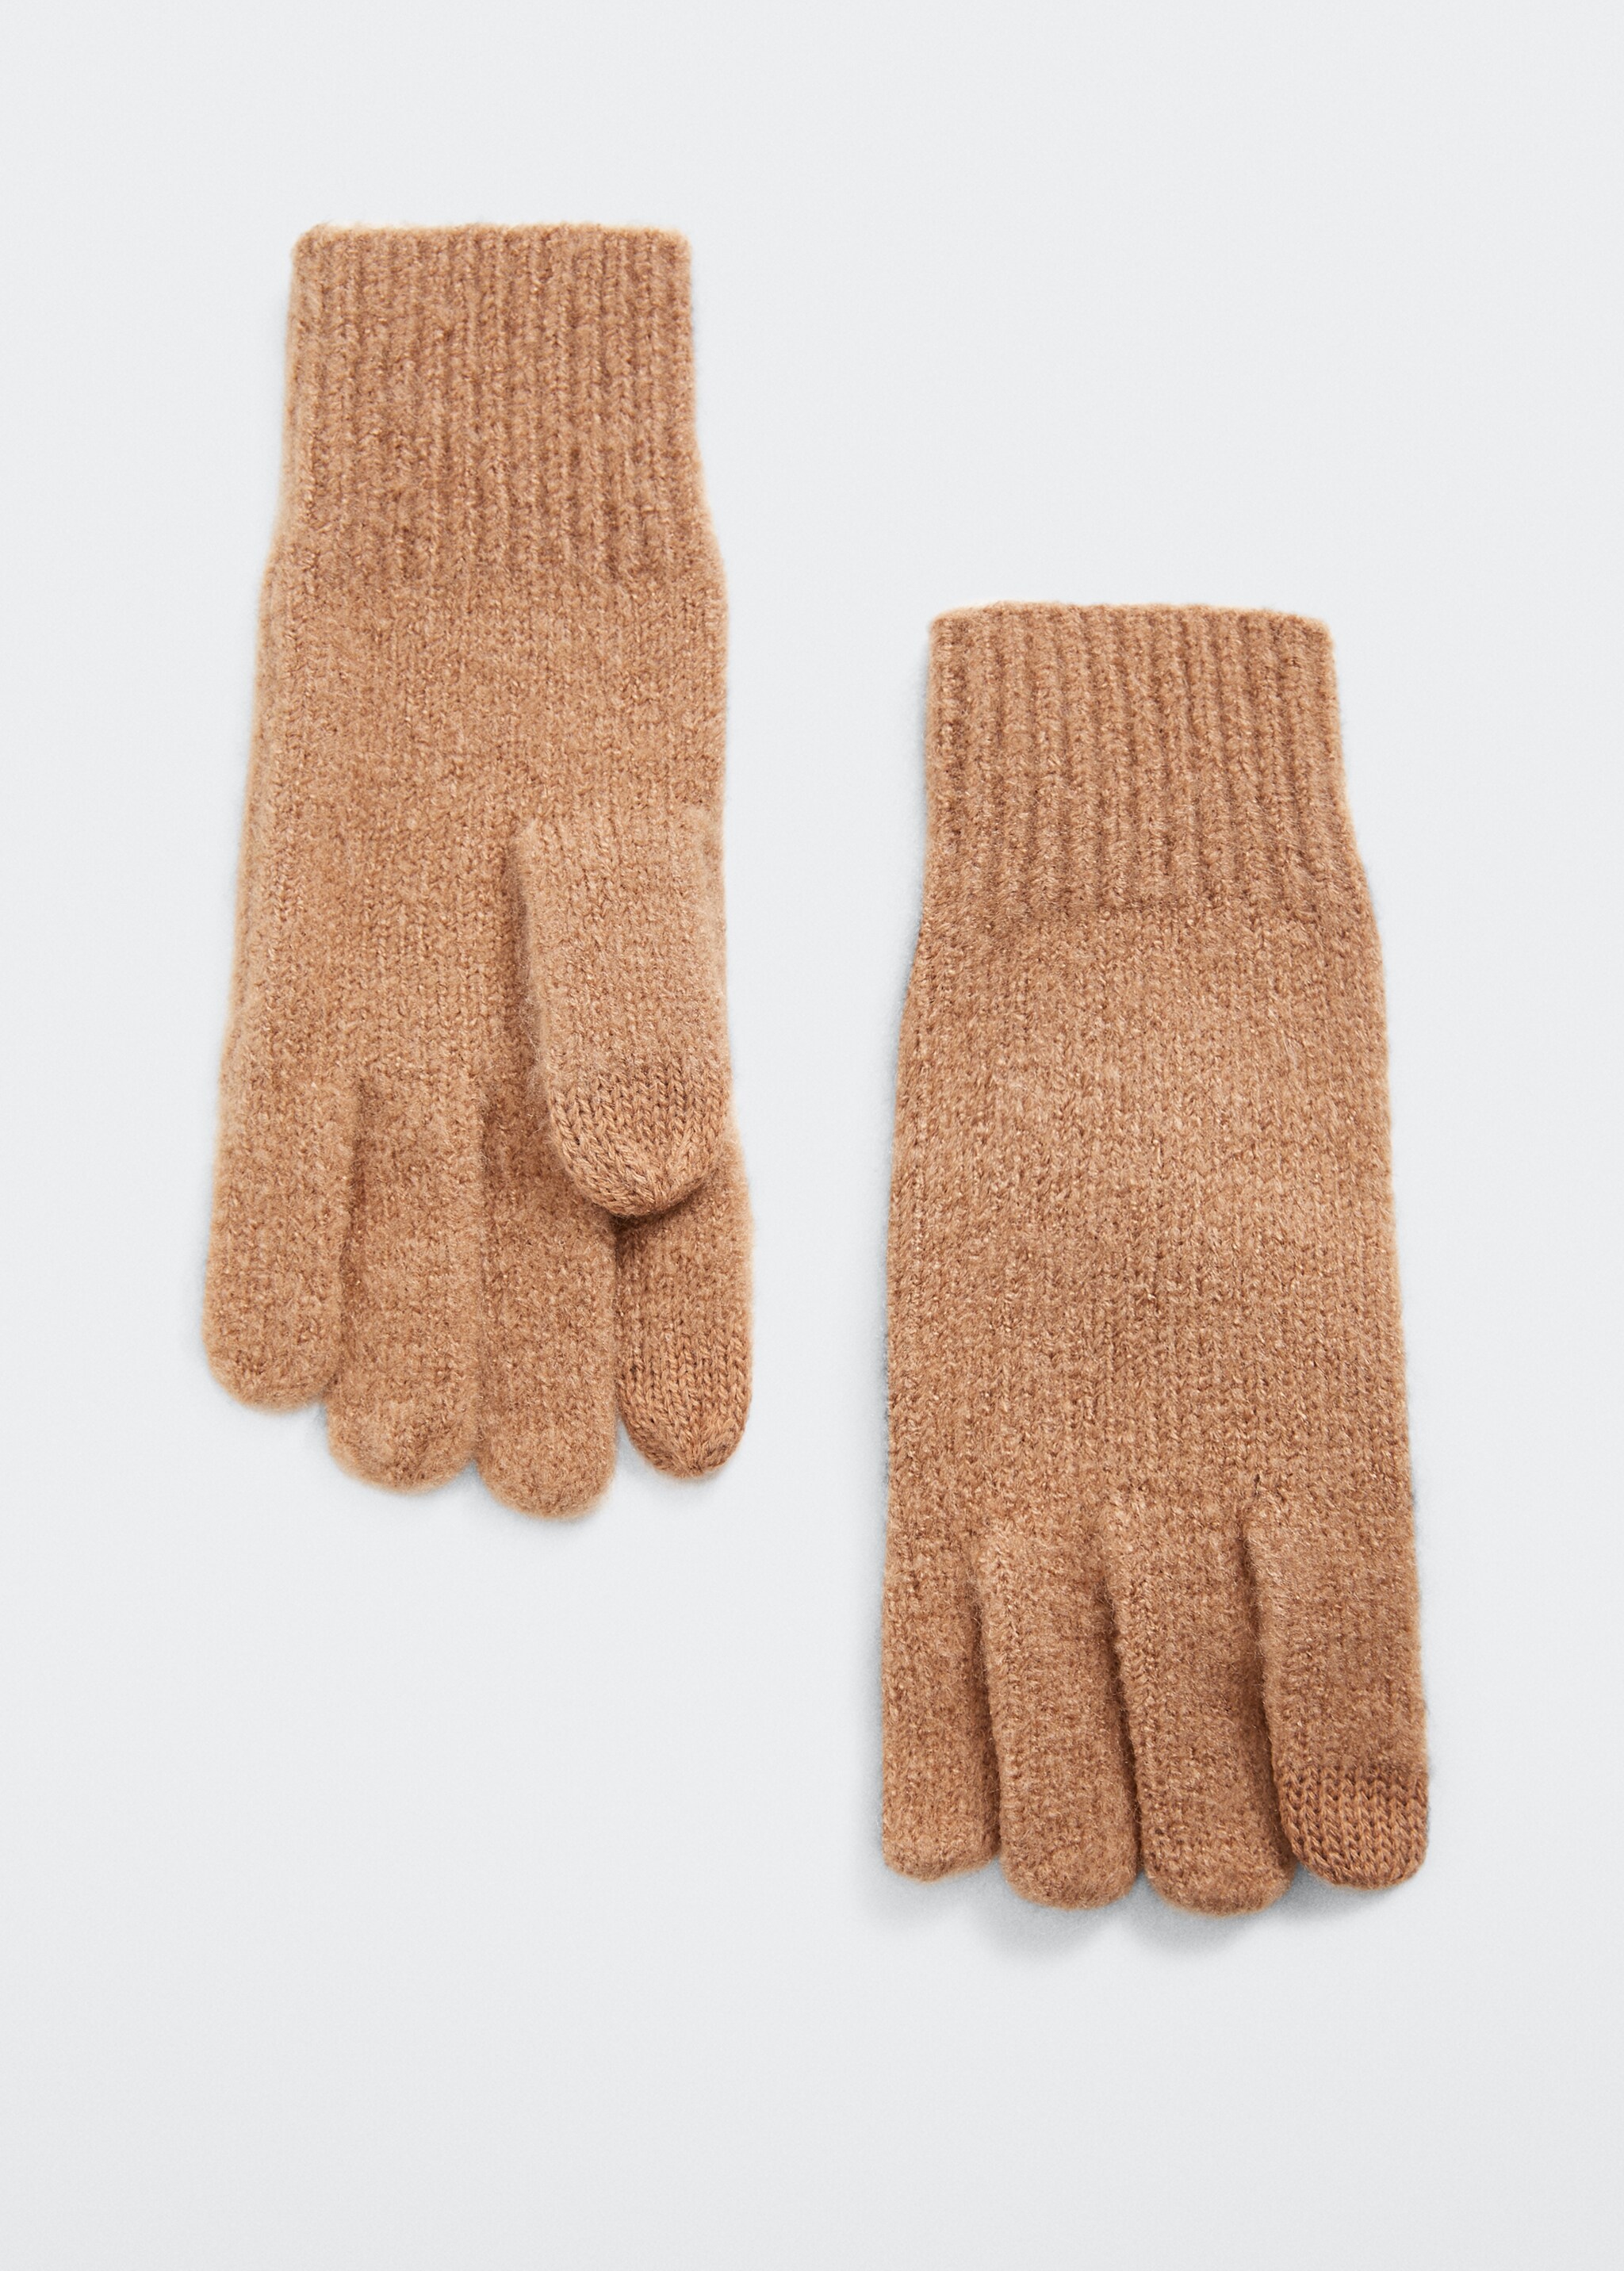 Ribbed knit gloves - Article without model